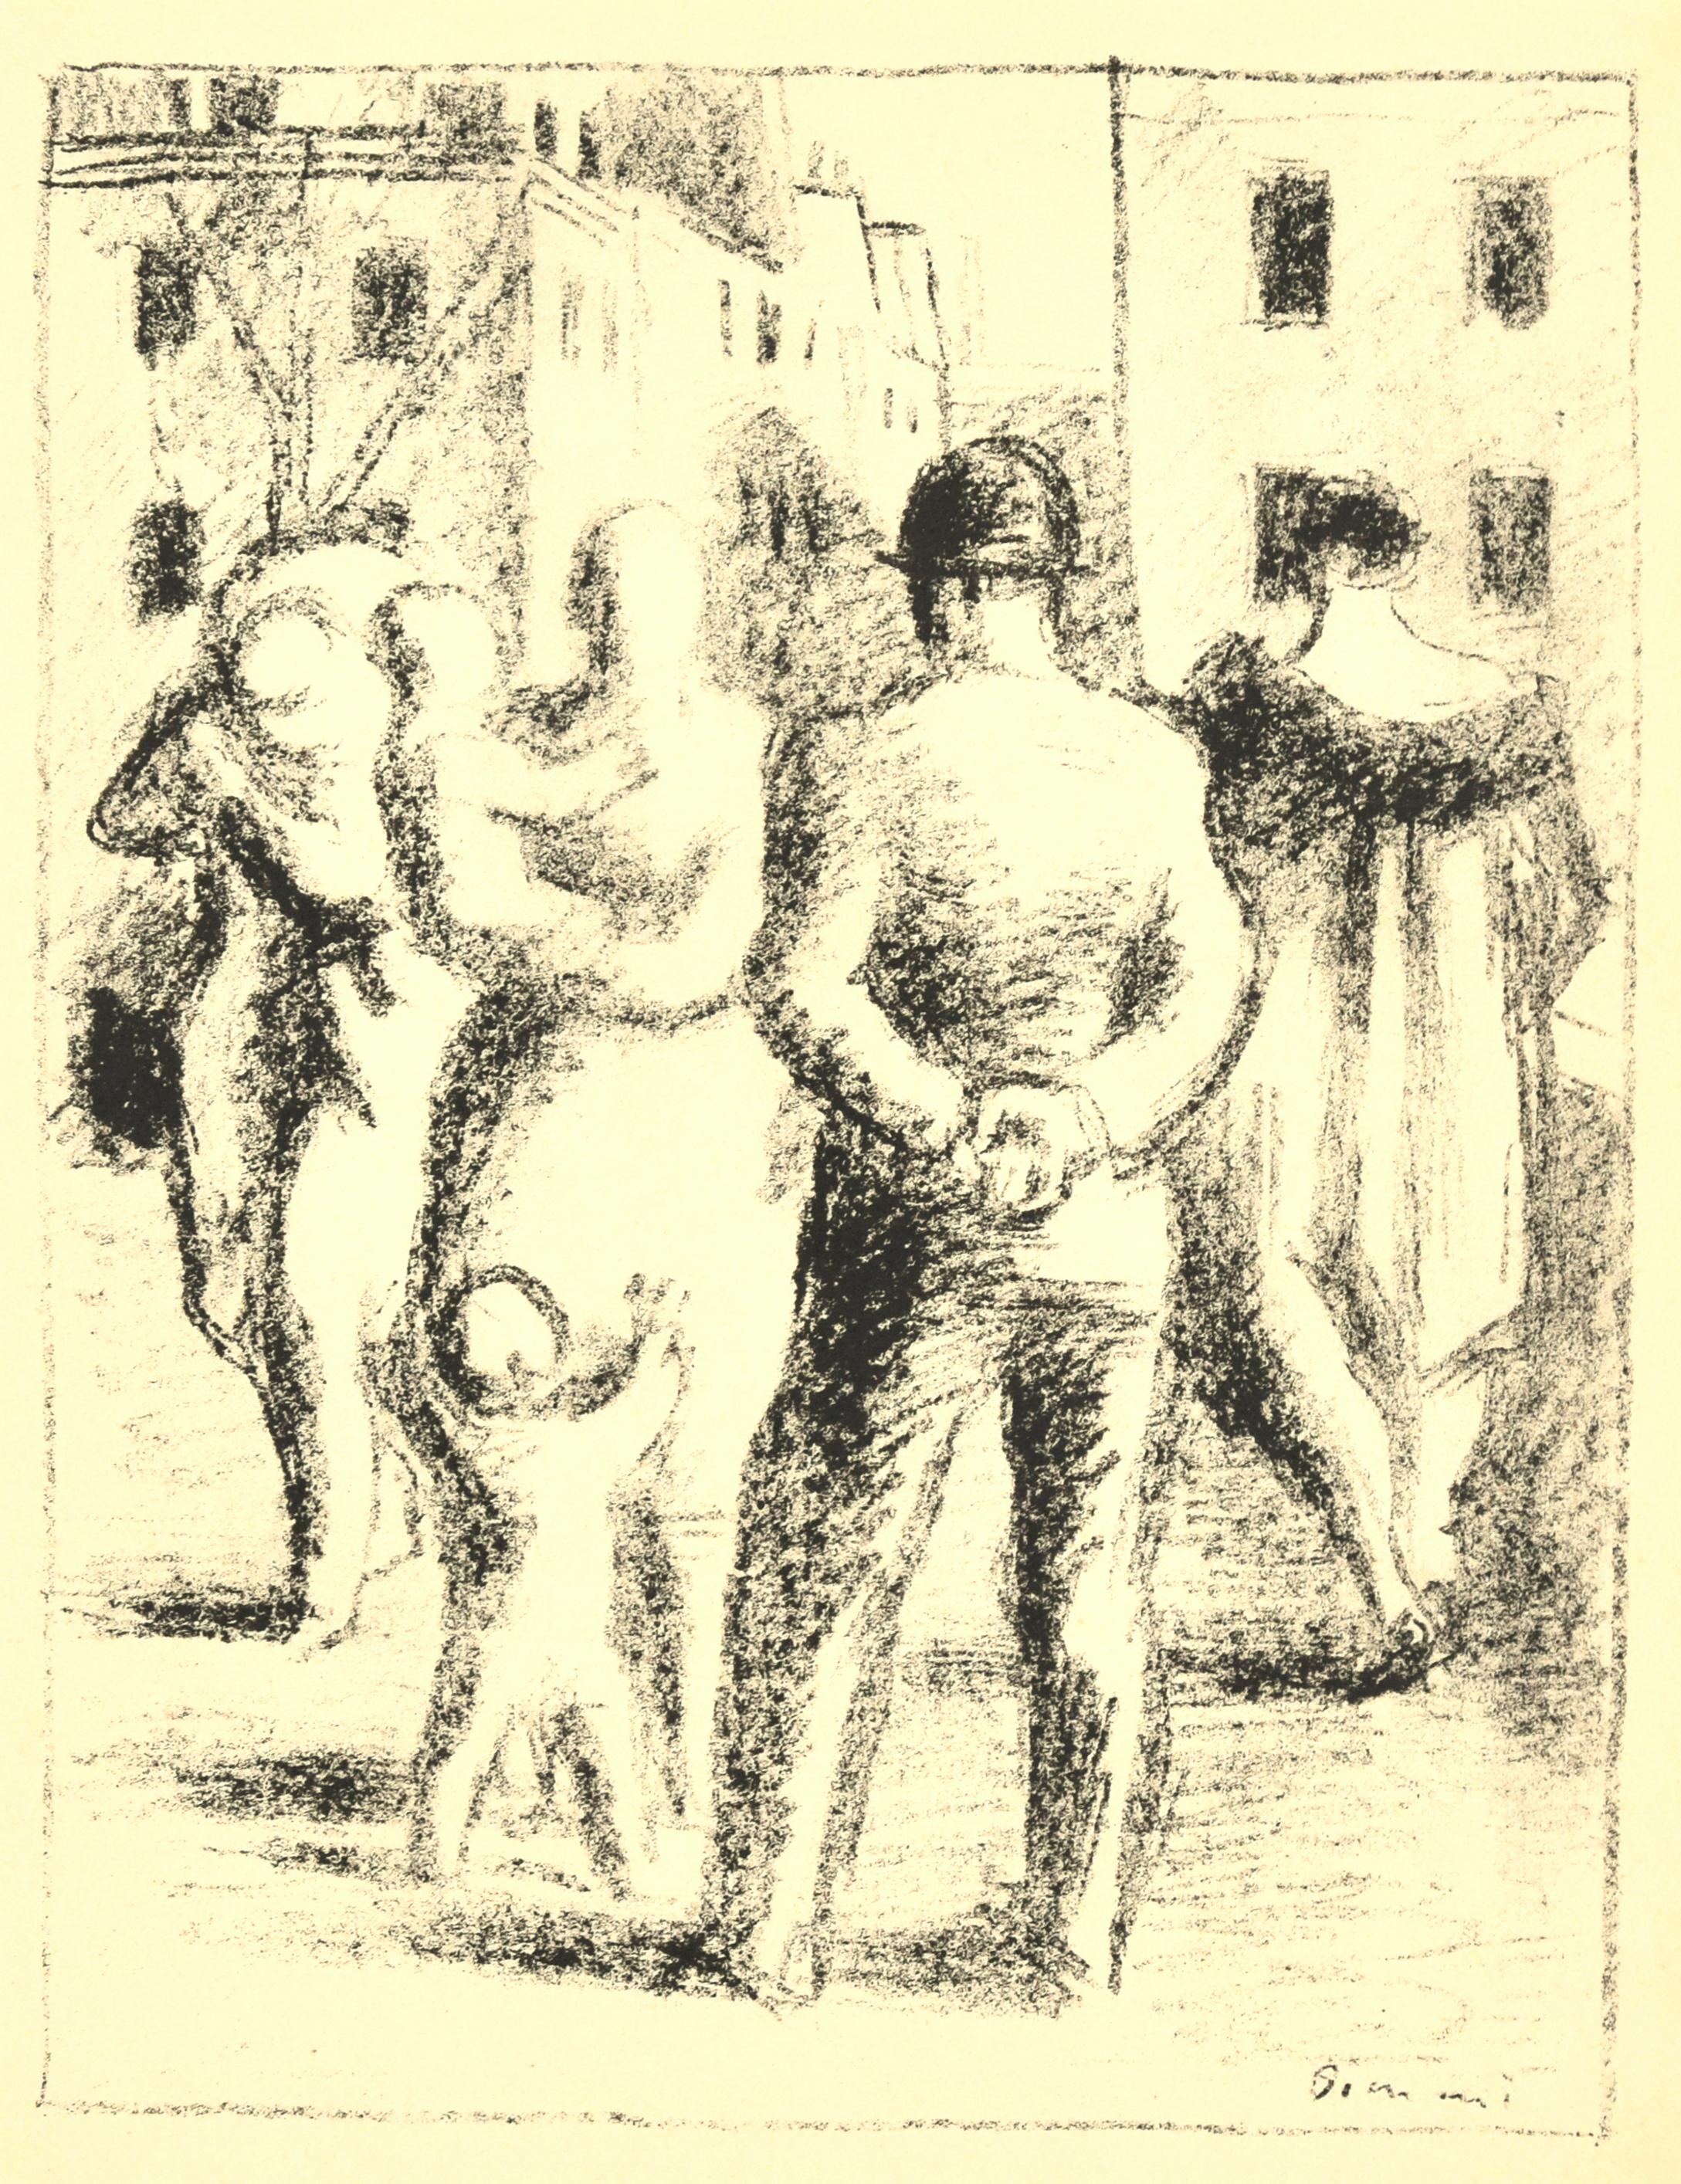 Wilhelm  Gimmi Figurative Print - Walking Figures - Original Lithograph by W. Gimmi - Early 20th Century